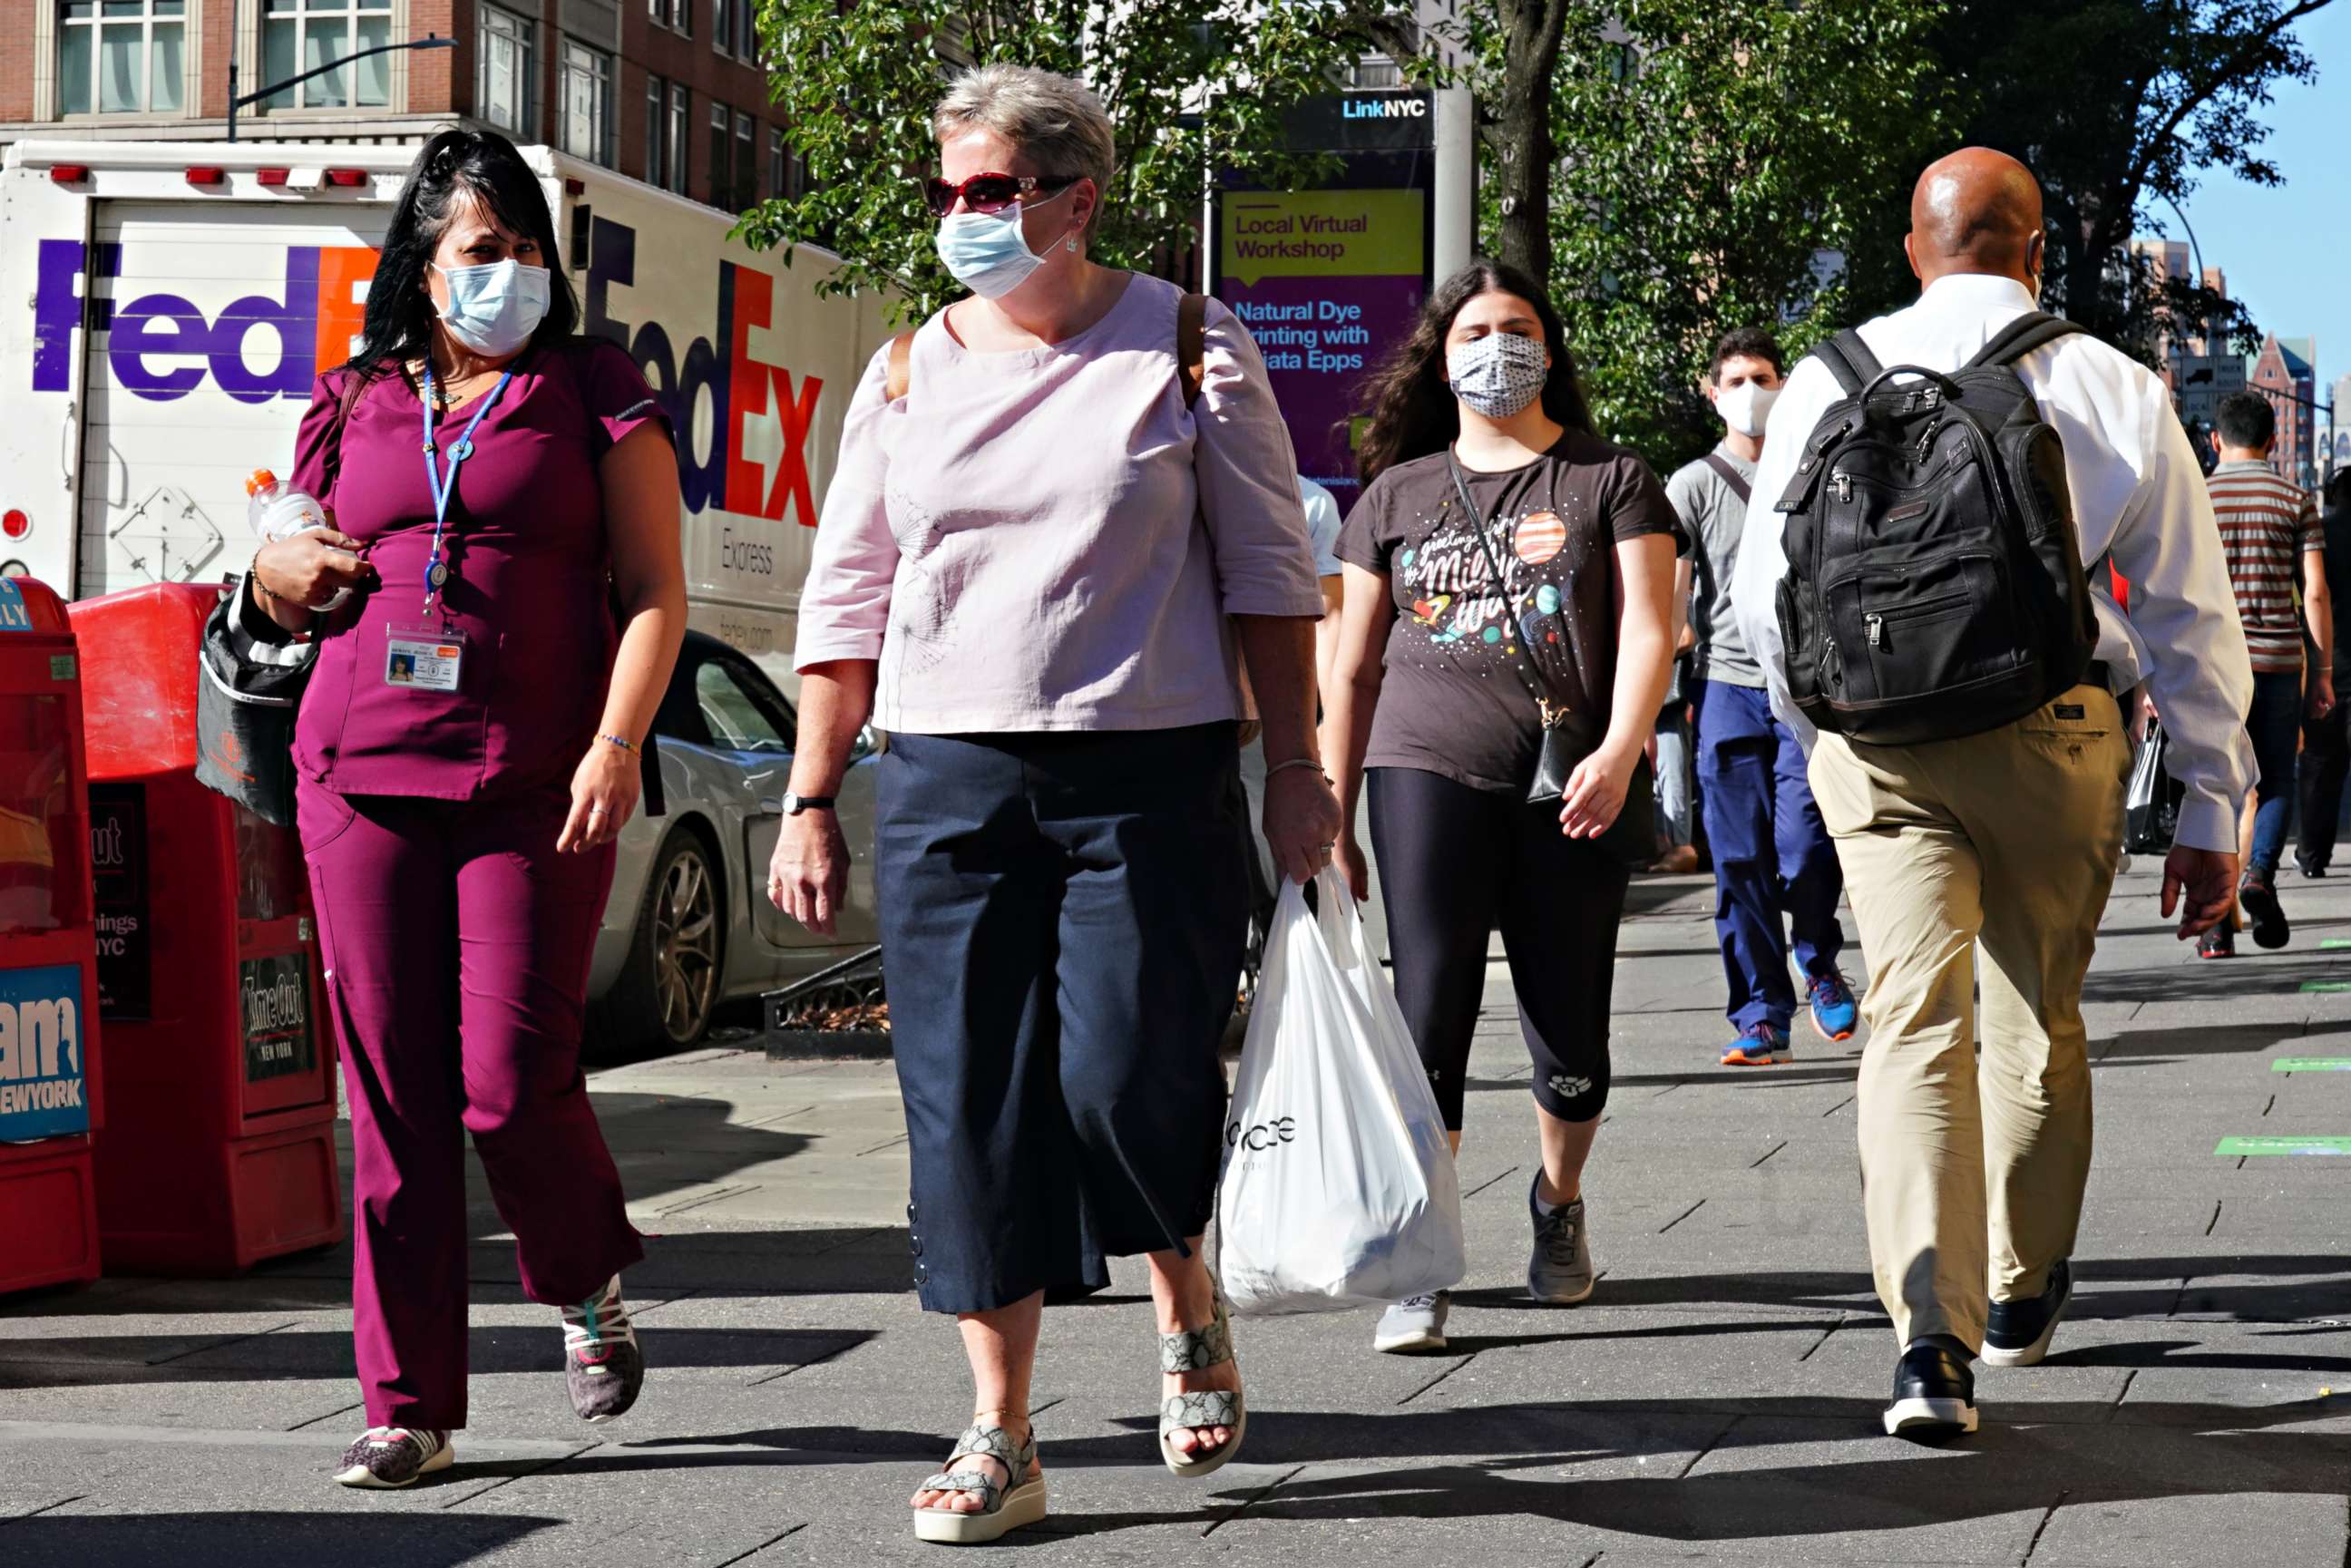 PHOTO: NEW YORK, NEW YORK - JULY 14: People walk while wearing protective masks as New York City moves into Phase 3 of re-opening following restrictions imposed to curb the coronavirus pandemic on July 14, 2020.